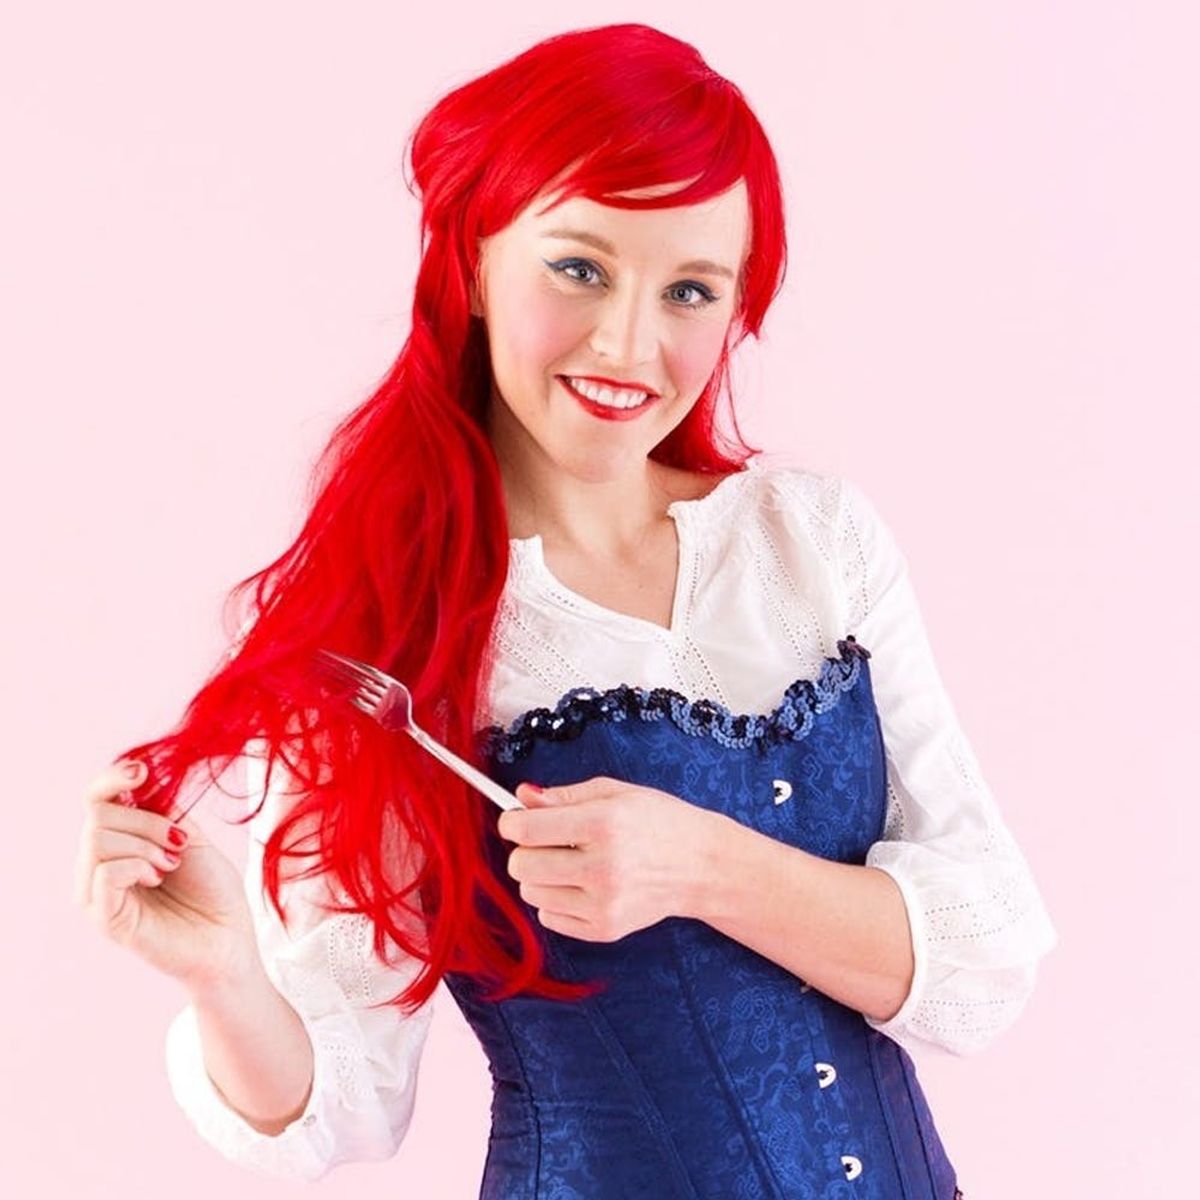 Be Part of Their World With This DIY Ariel Costume